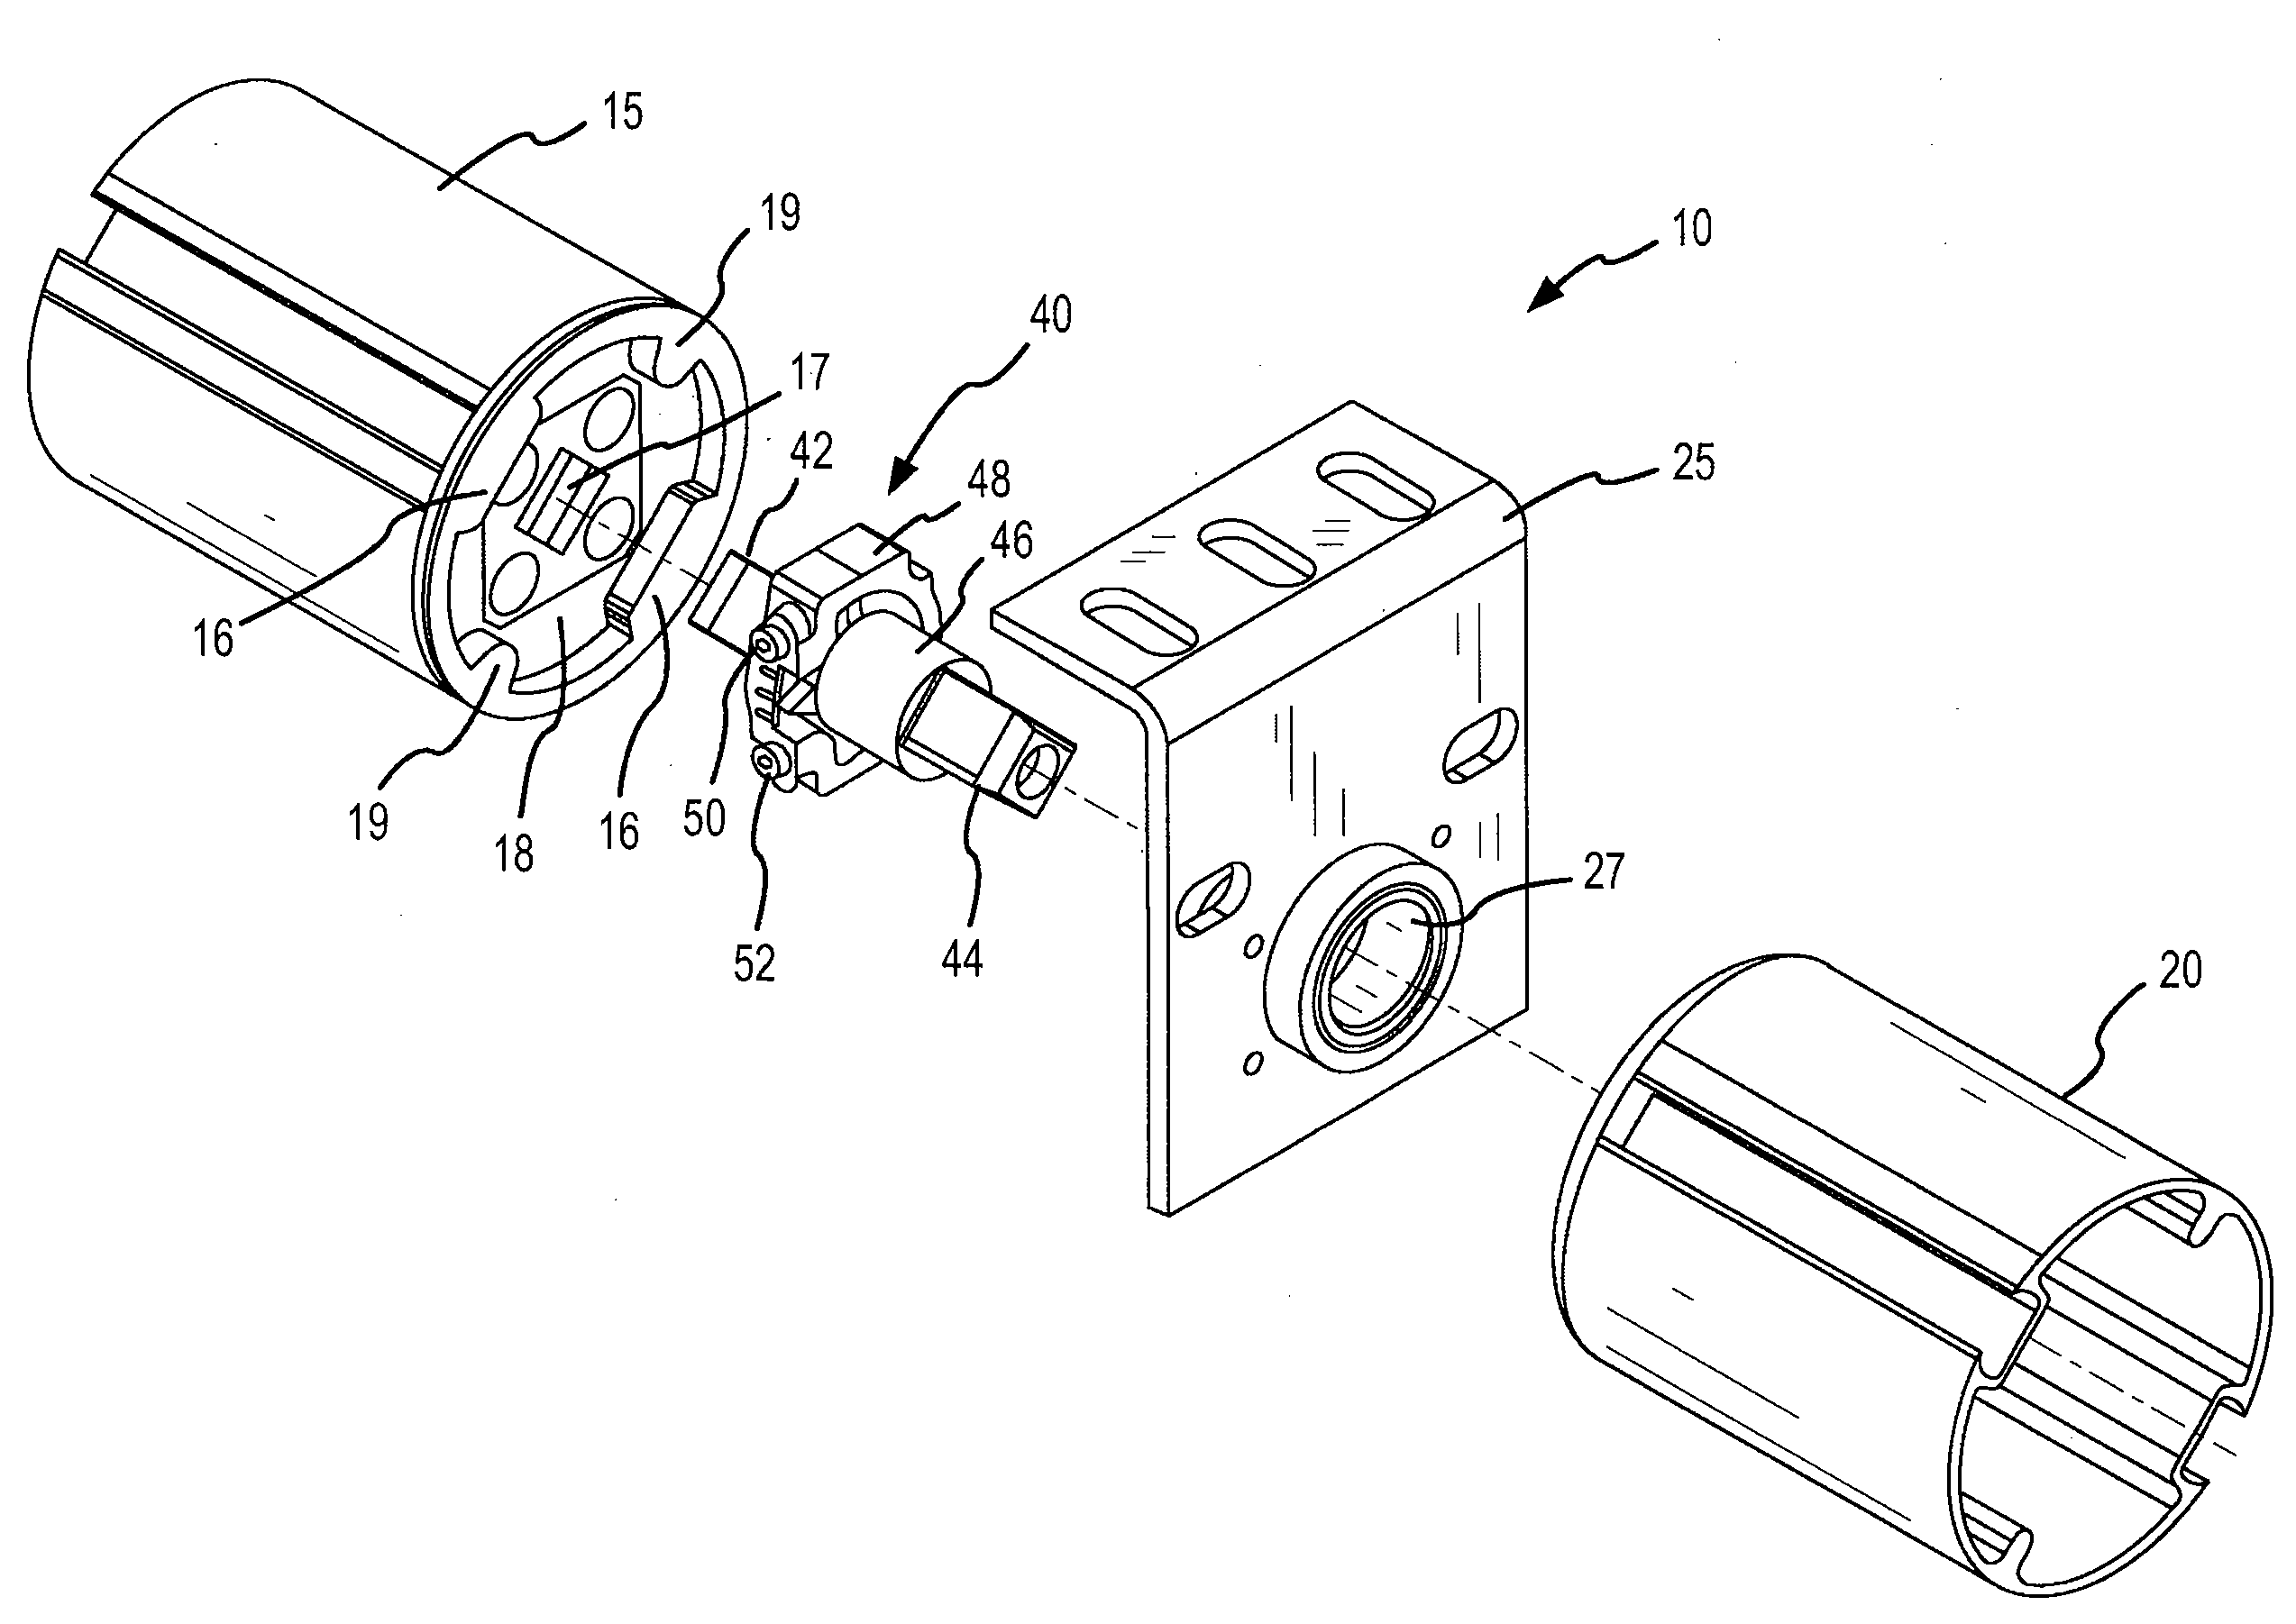 System and method for an adjustable connector